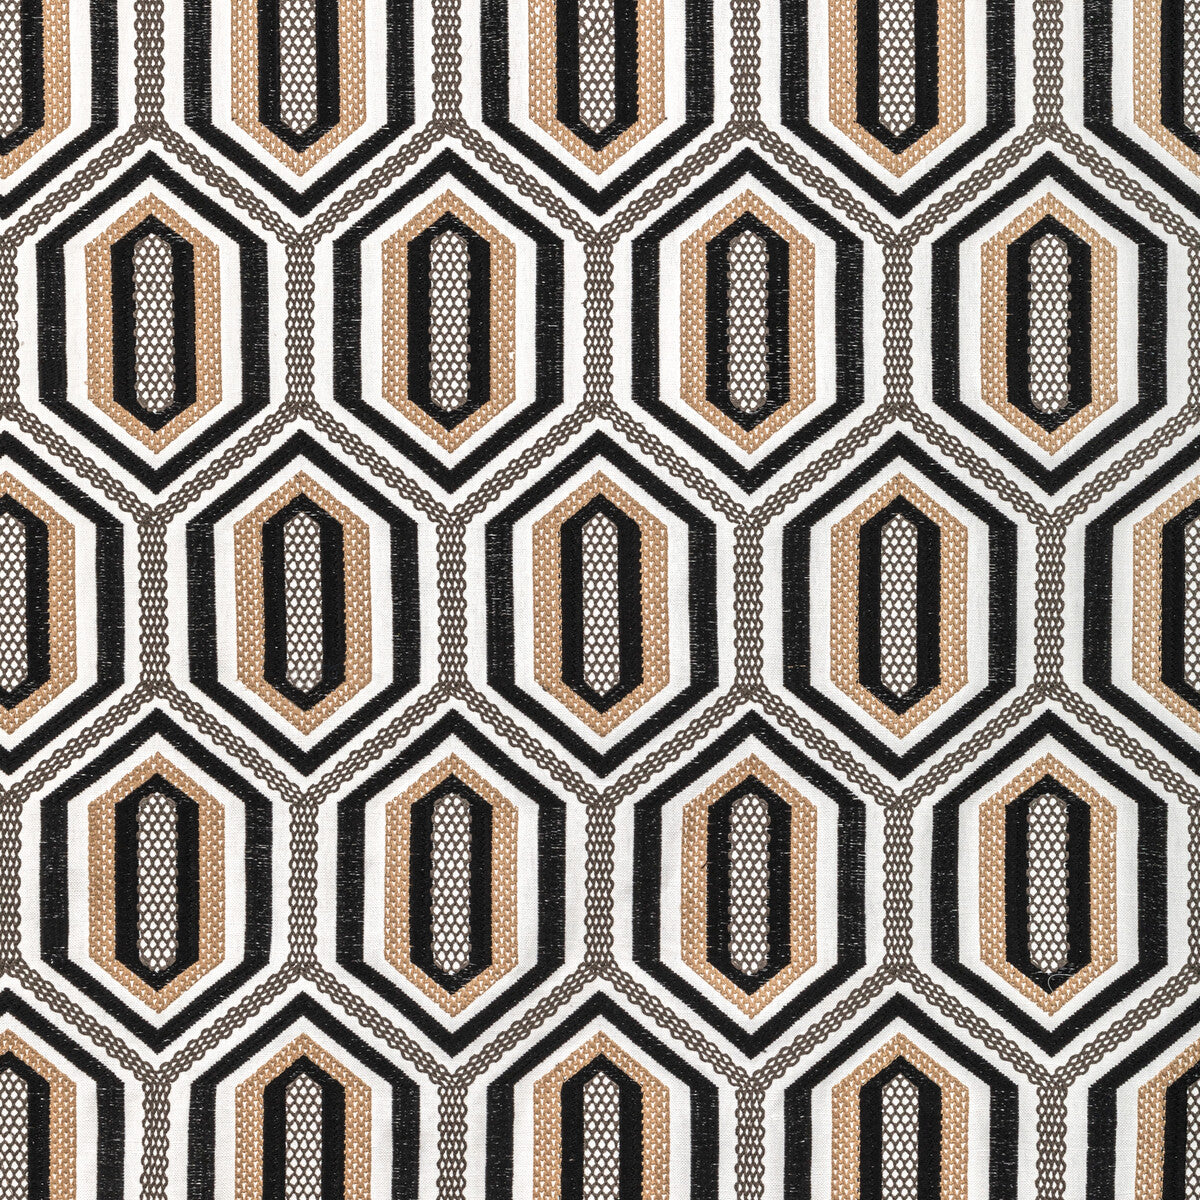 Kaleidoscope Emb fabric in onyx color - pattern 36368.816.0 - by Kravet Couture in the Corey Damen Jenkins Trad Nouveau collection